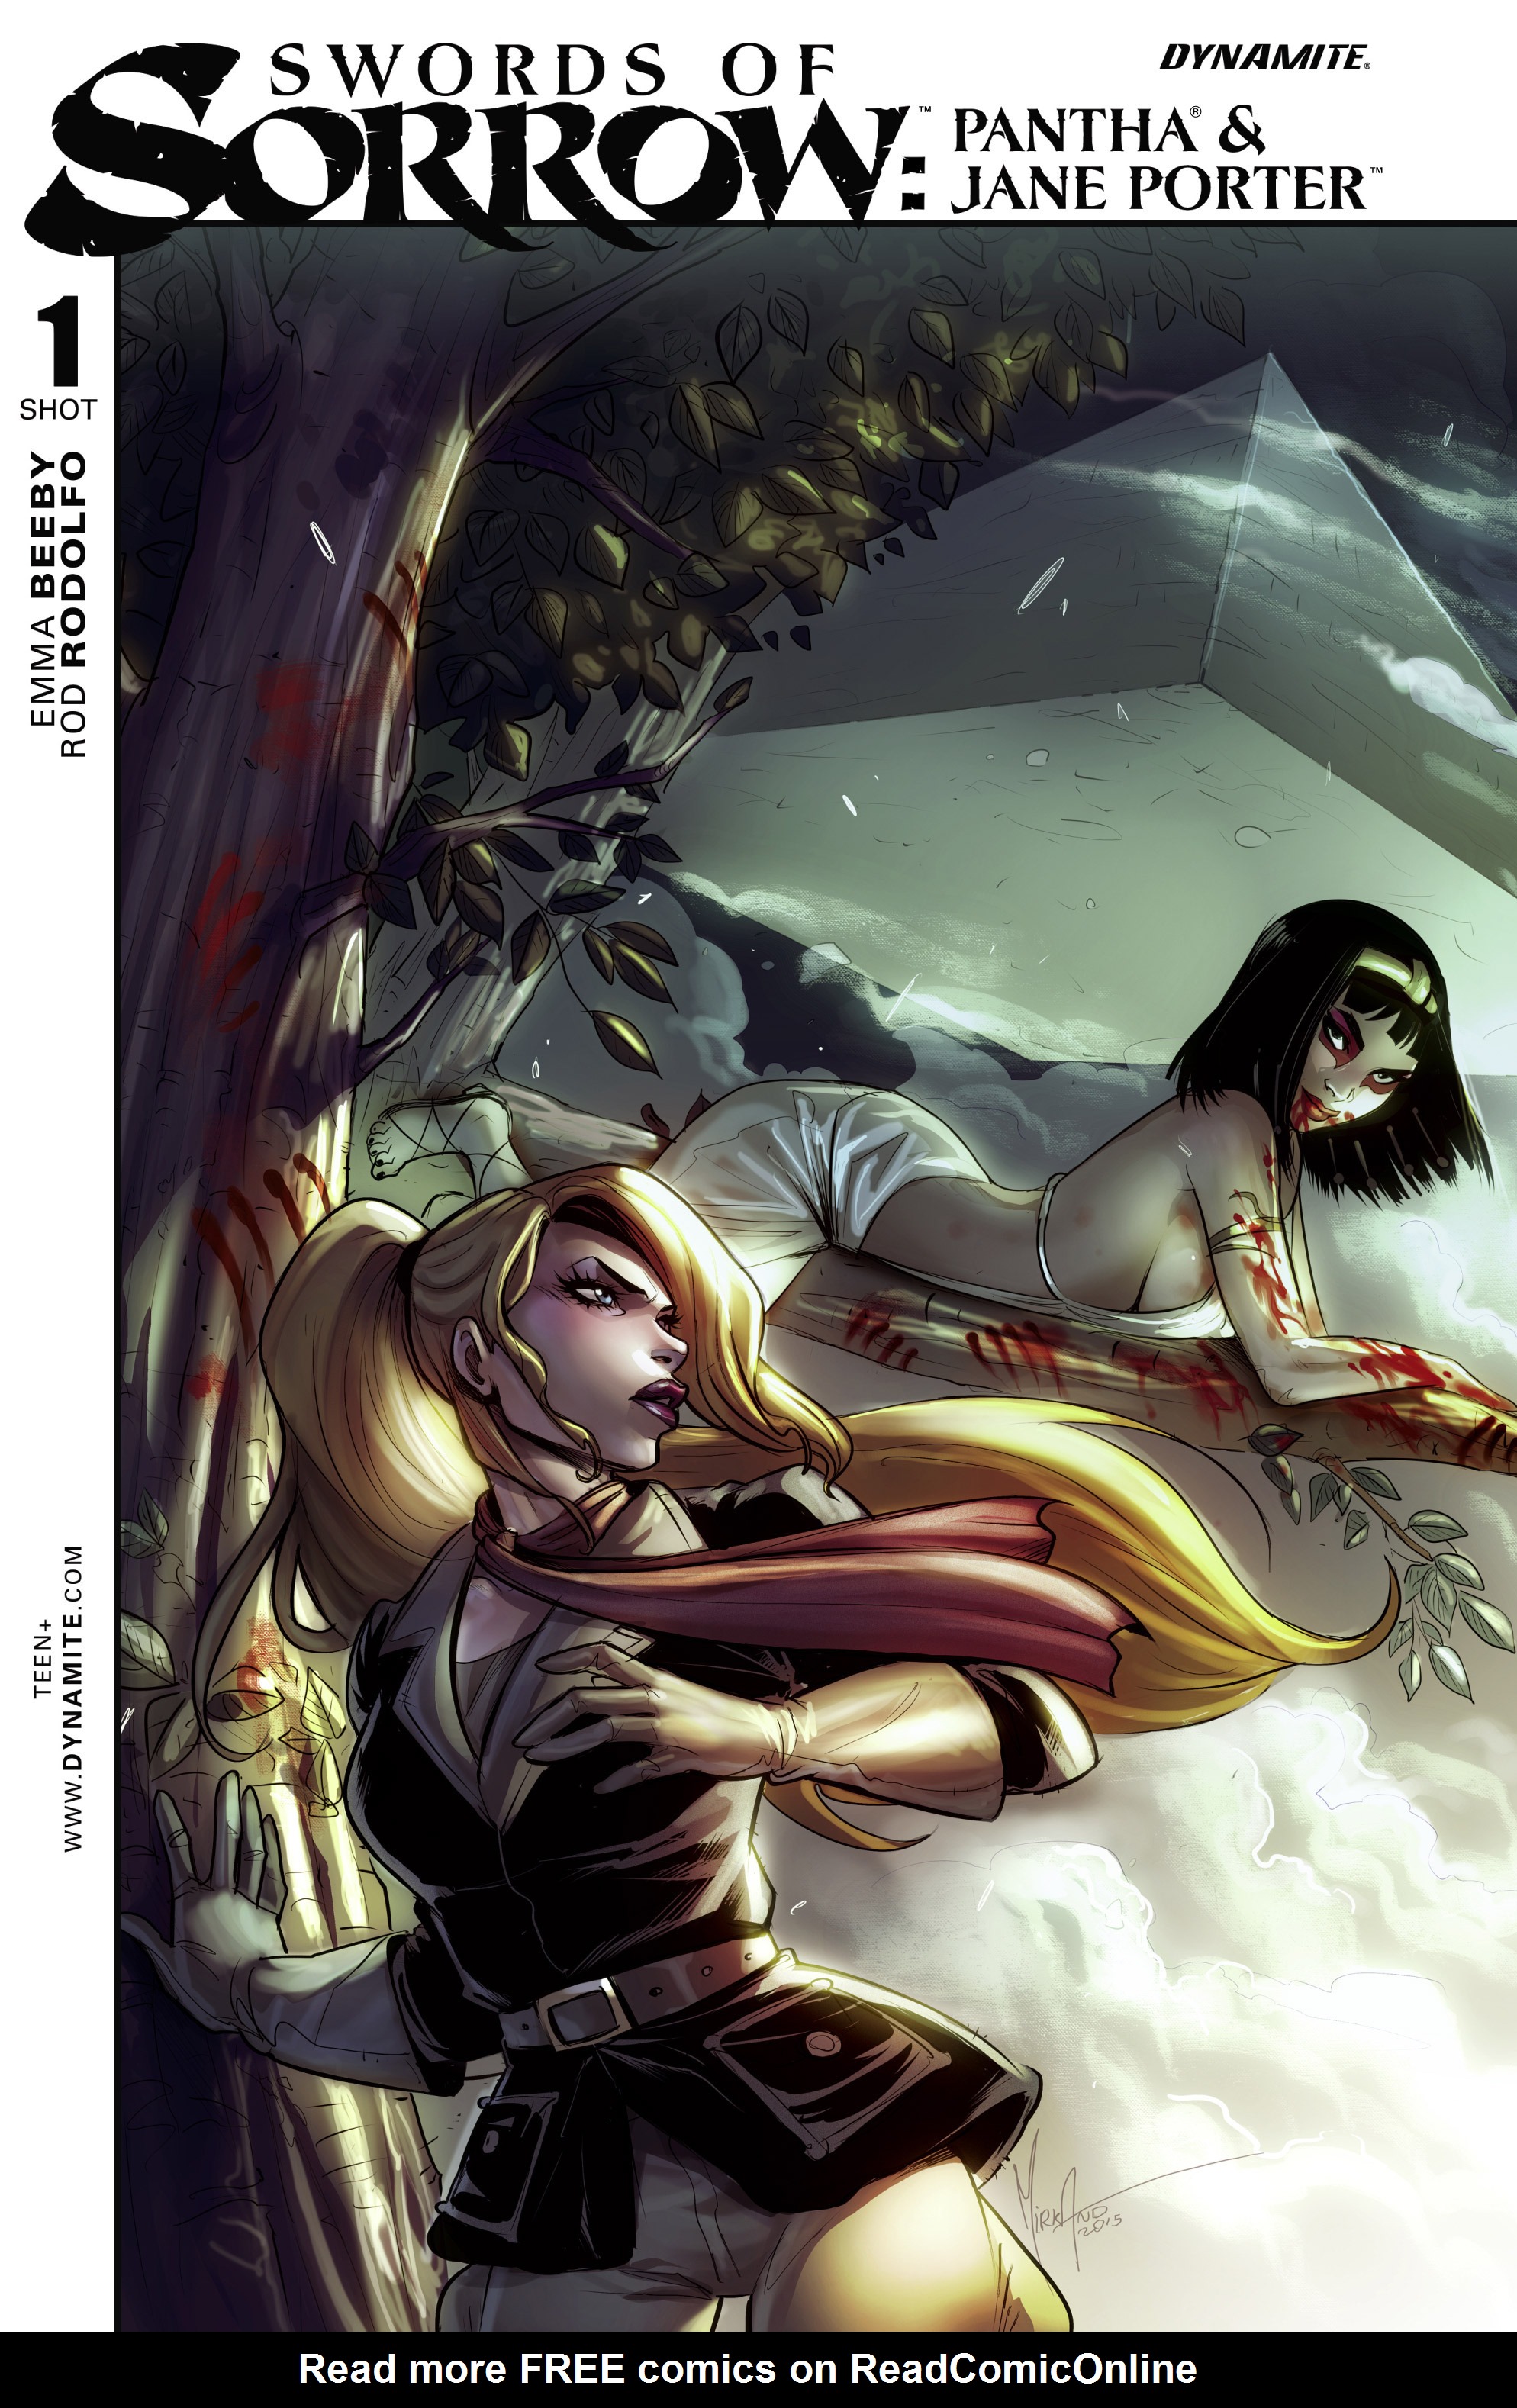 Read online Swords of Sorrow: Pantha & Jane Porter Special comic -  Issue # Full - 1